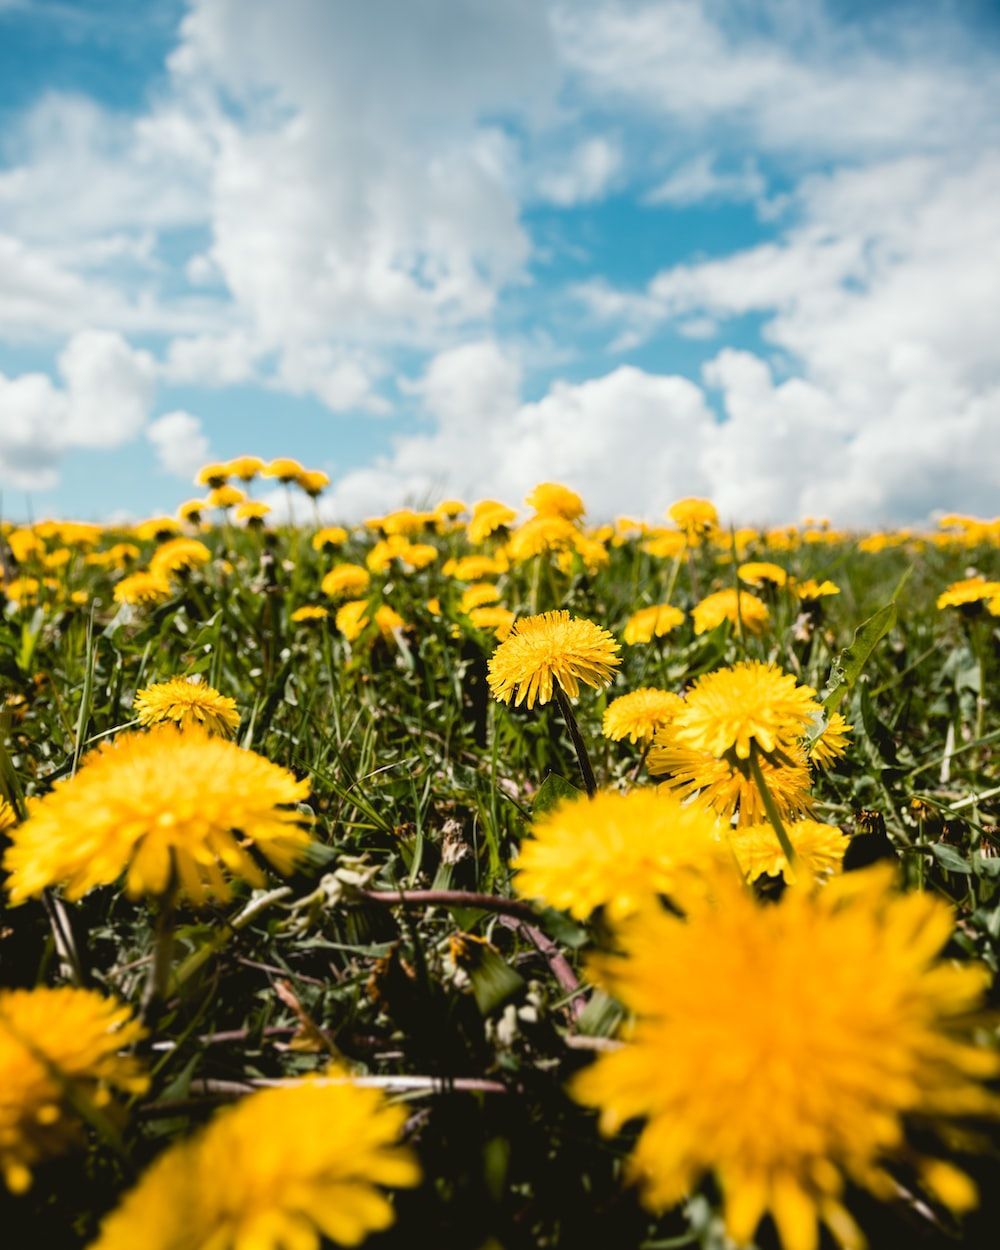 Dandelions Picture. Download Free Image